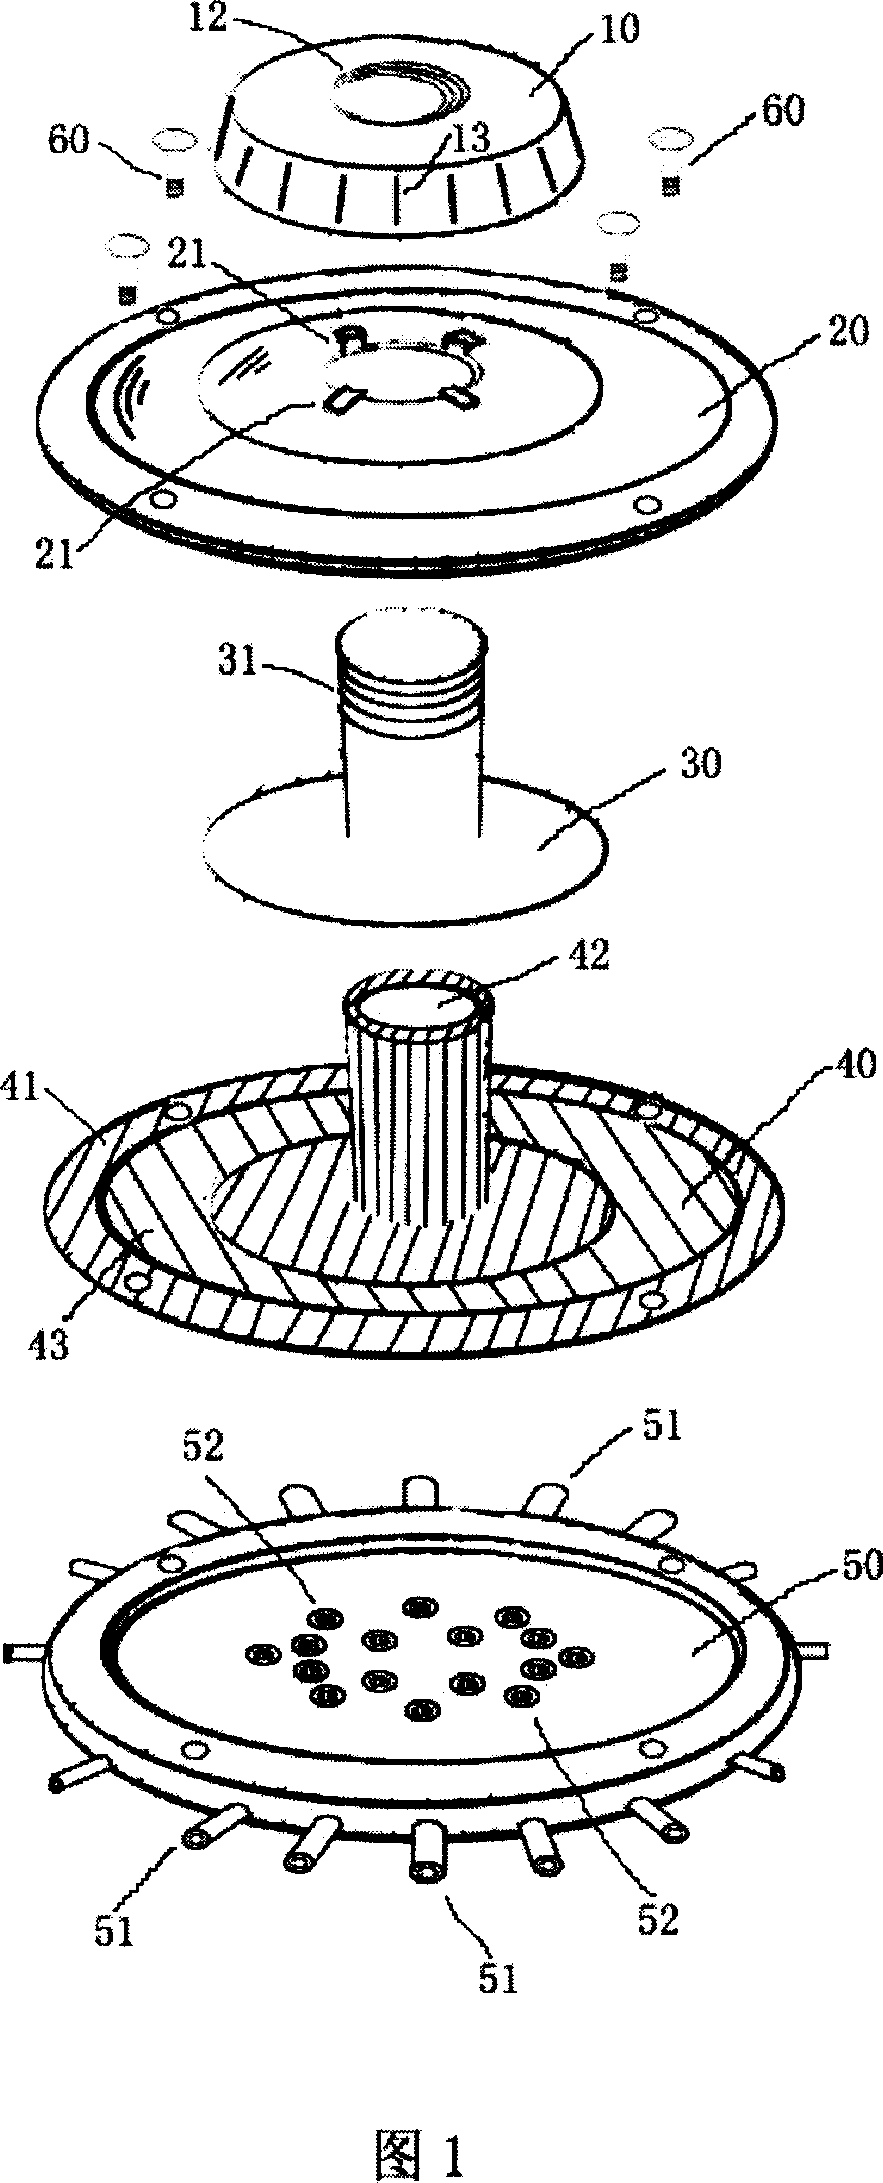 Multichannel bidirectional air-valve for charging or releasing air to multiple independence air bags